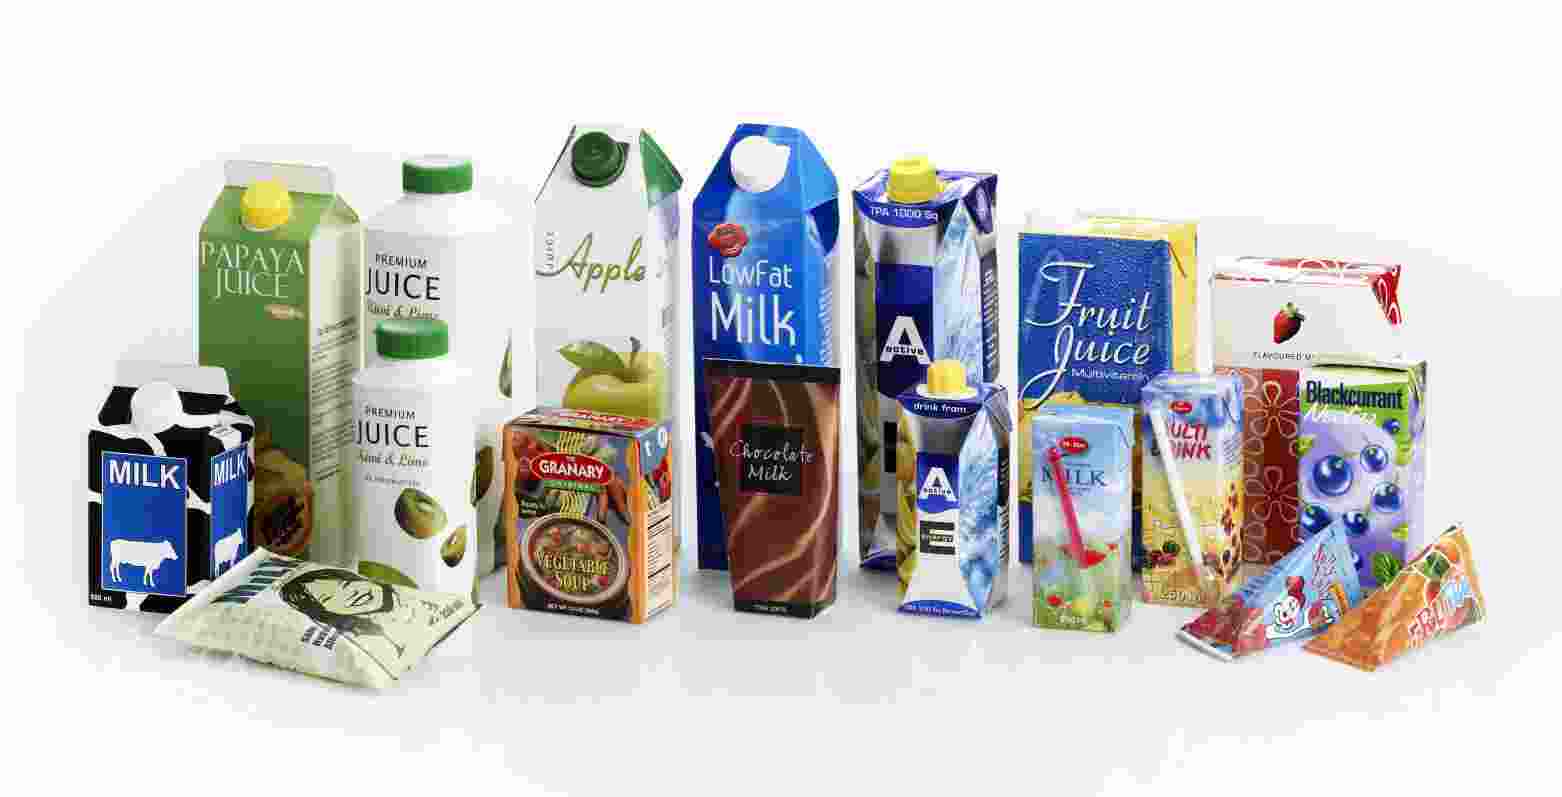 Tetra Pak 2013 results expands in Brazil